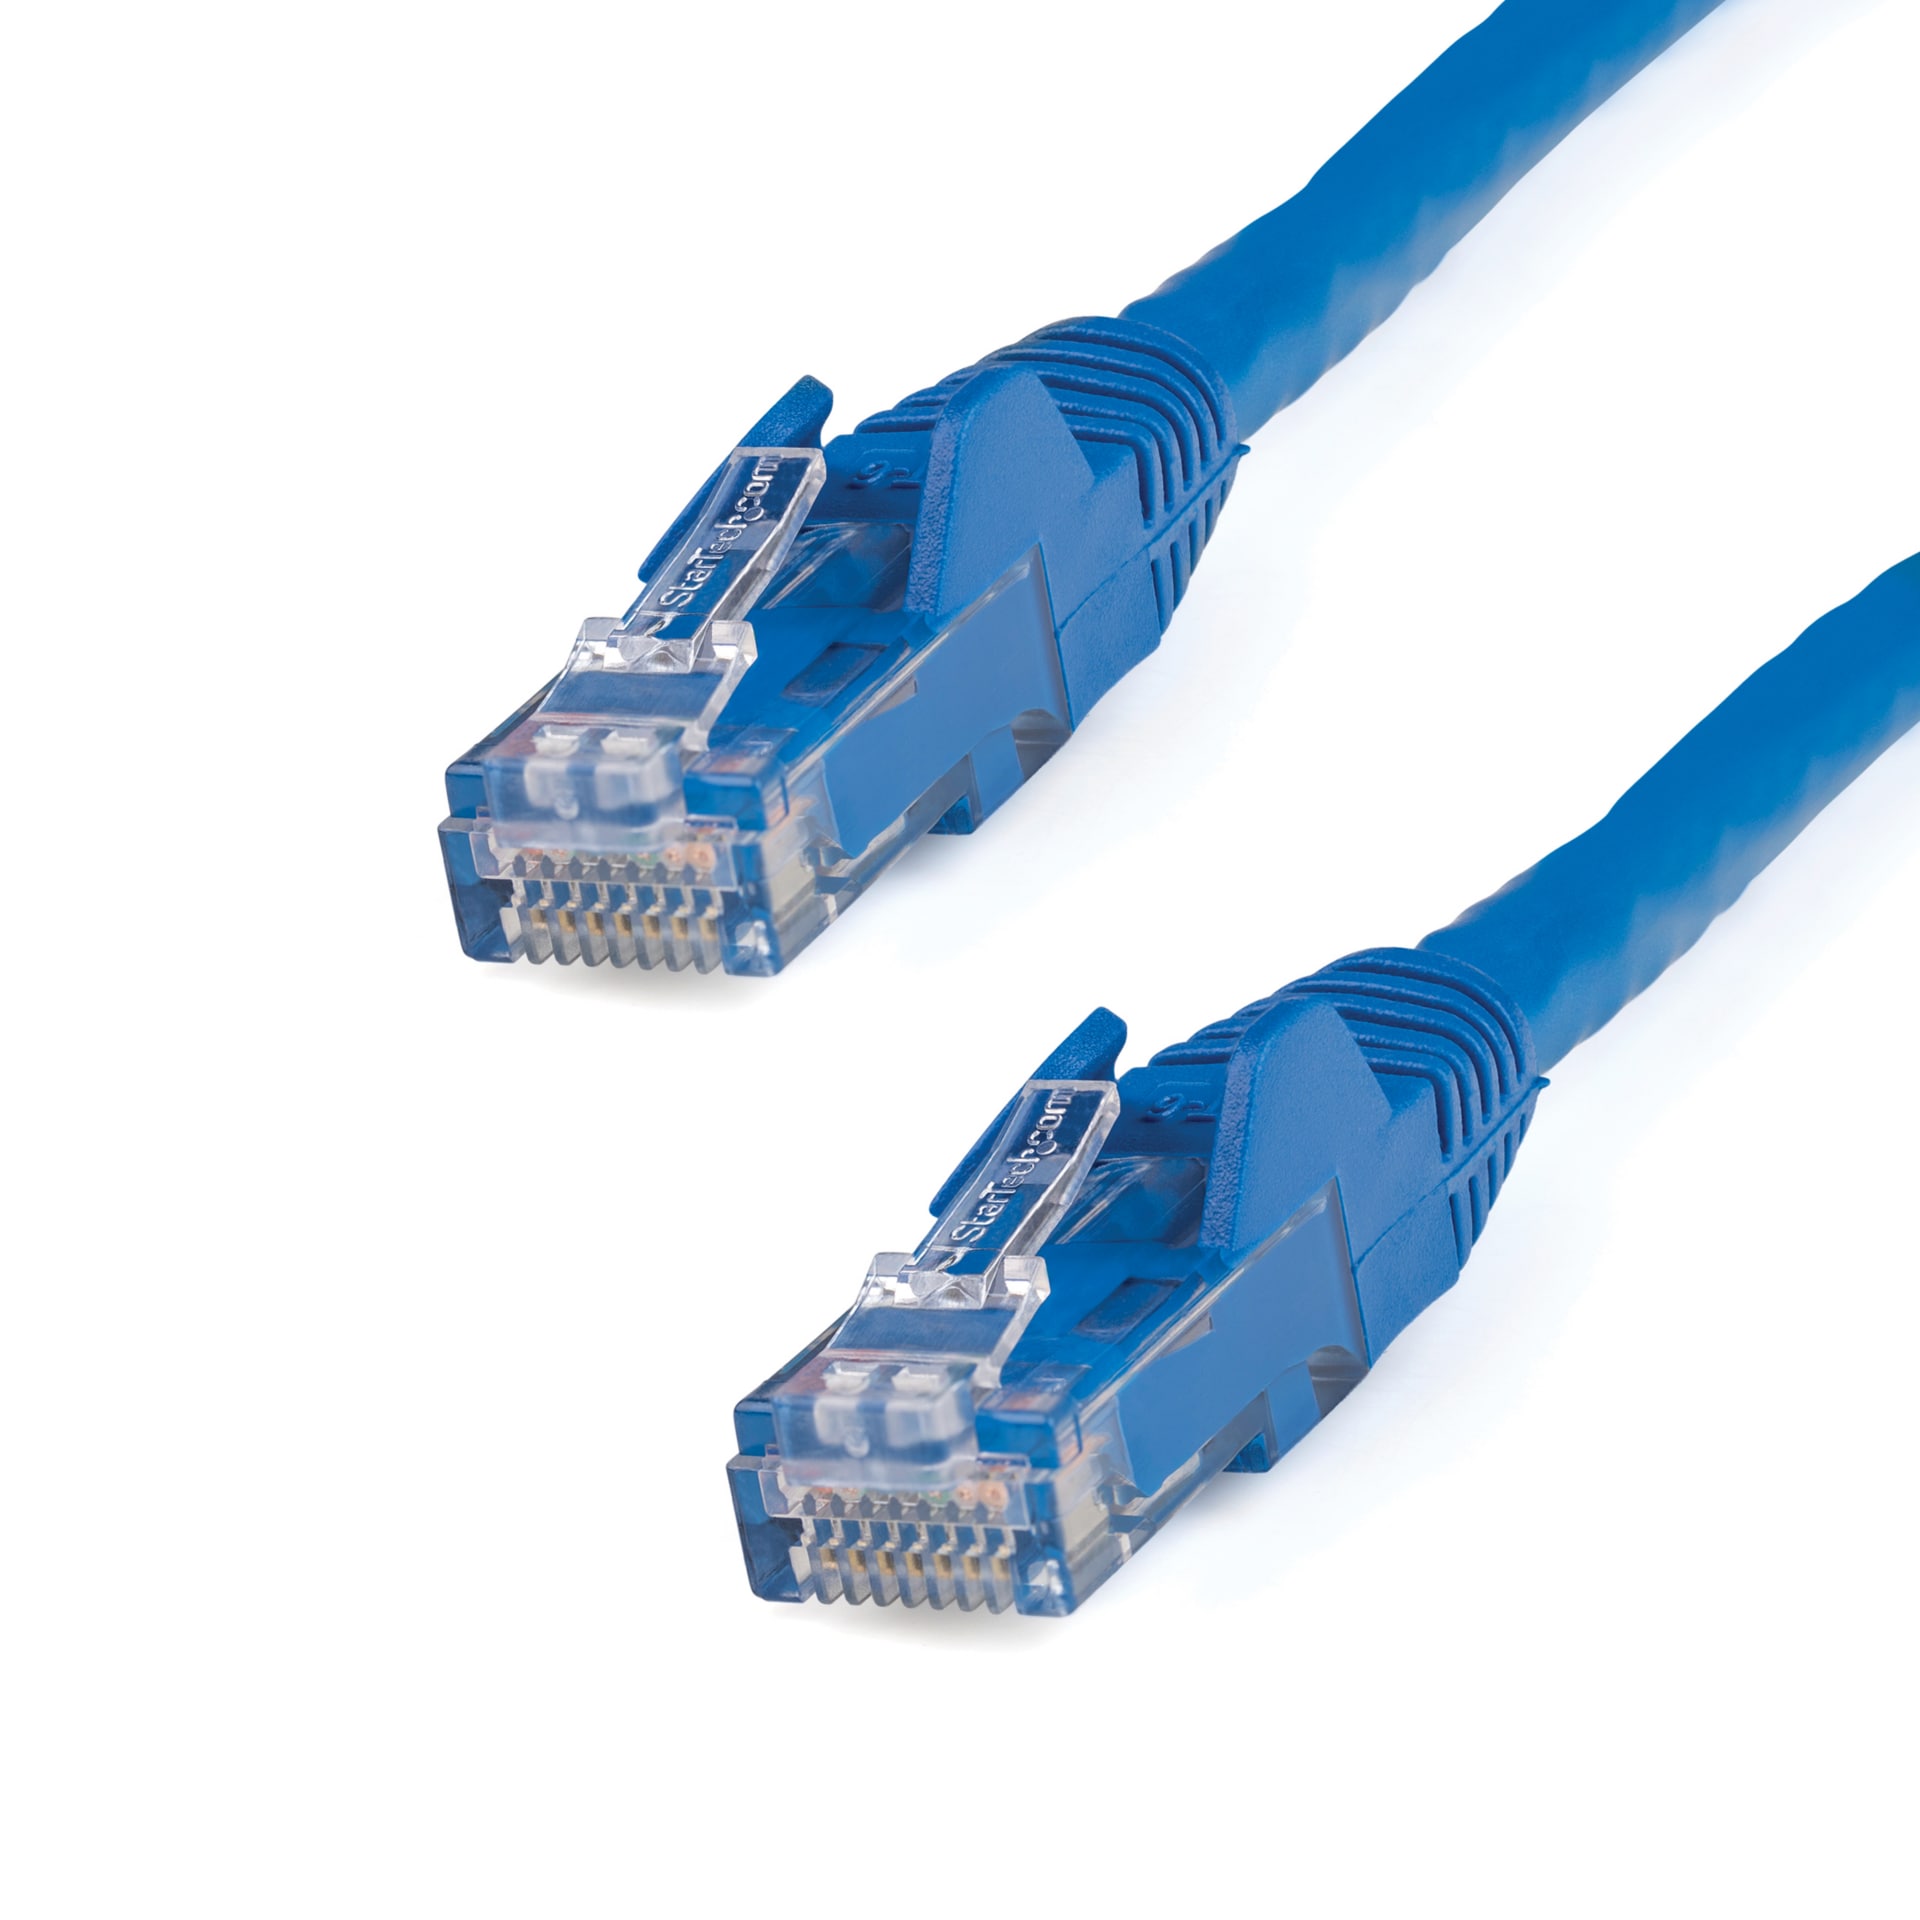 StarTech.com CAT6 Ethernet Cable 150' Blue 650MHz PoE Snagless Patch Cord